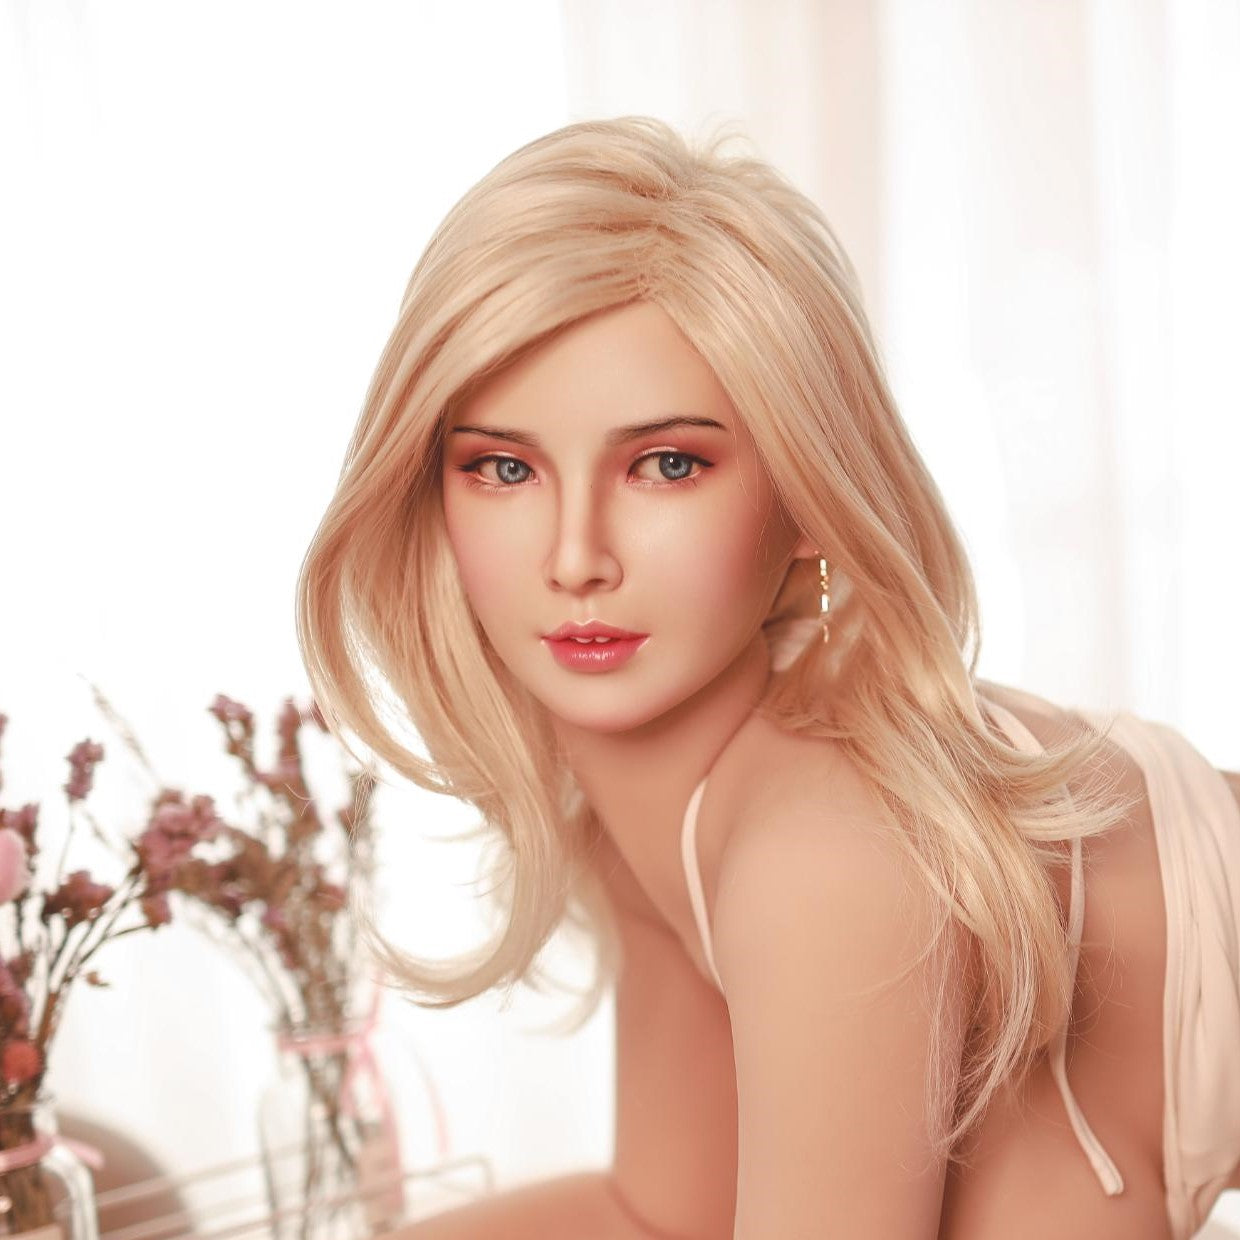 Neodoll Sugar babe - Jennifer - Realistic sex doll head - M16 Compatible - Implanted Golden hair -Silicone color